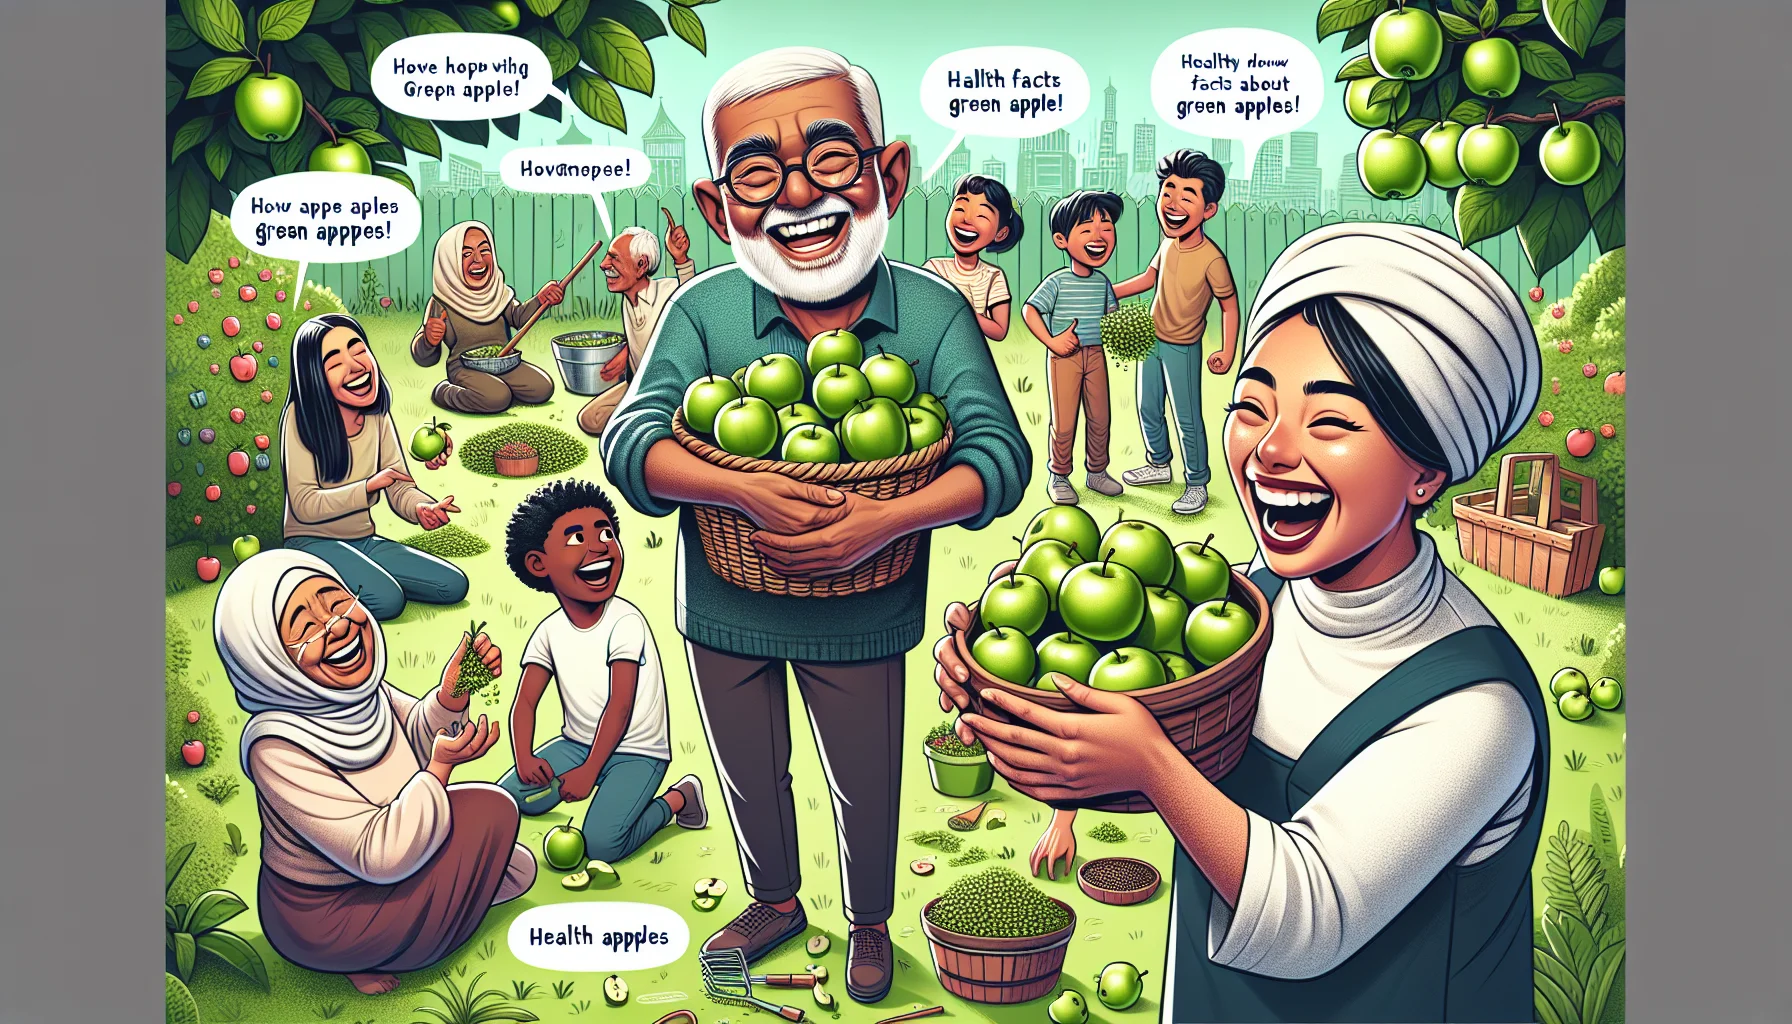 Create a fun and engaging image that humorously emphasizes the health benefits of green apples. Picture an afternoon in a lush garden, with a variety of people of different ages, genders, and ethnic backgrounds all busily engaged in gardening activities. A sprightly older South Asian gentleman offers a basket filled with shiny green apples. A young Black girl is laughing heartily as she reaches for an apple. Nearby, a Middle-Eastern woman is showing her White son how to plant apple seeds, while Hispanic teenagers are jokingly comparing the sizes of the apples they've gathered. Messages highlighting health facts about green apples creatively popup around the image.